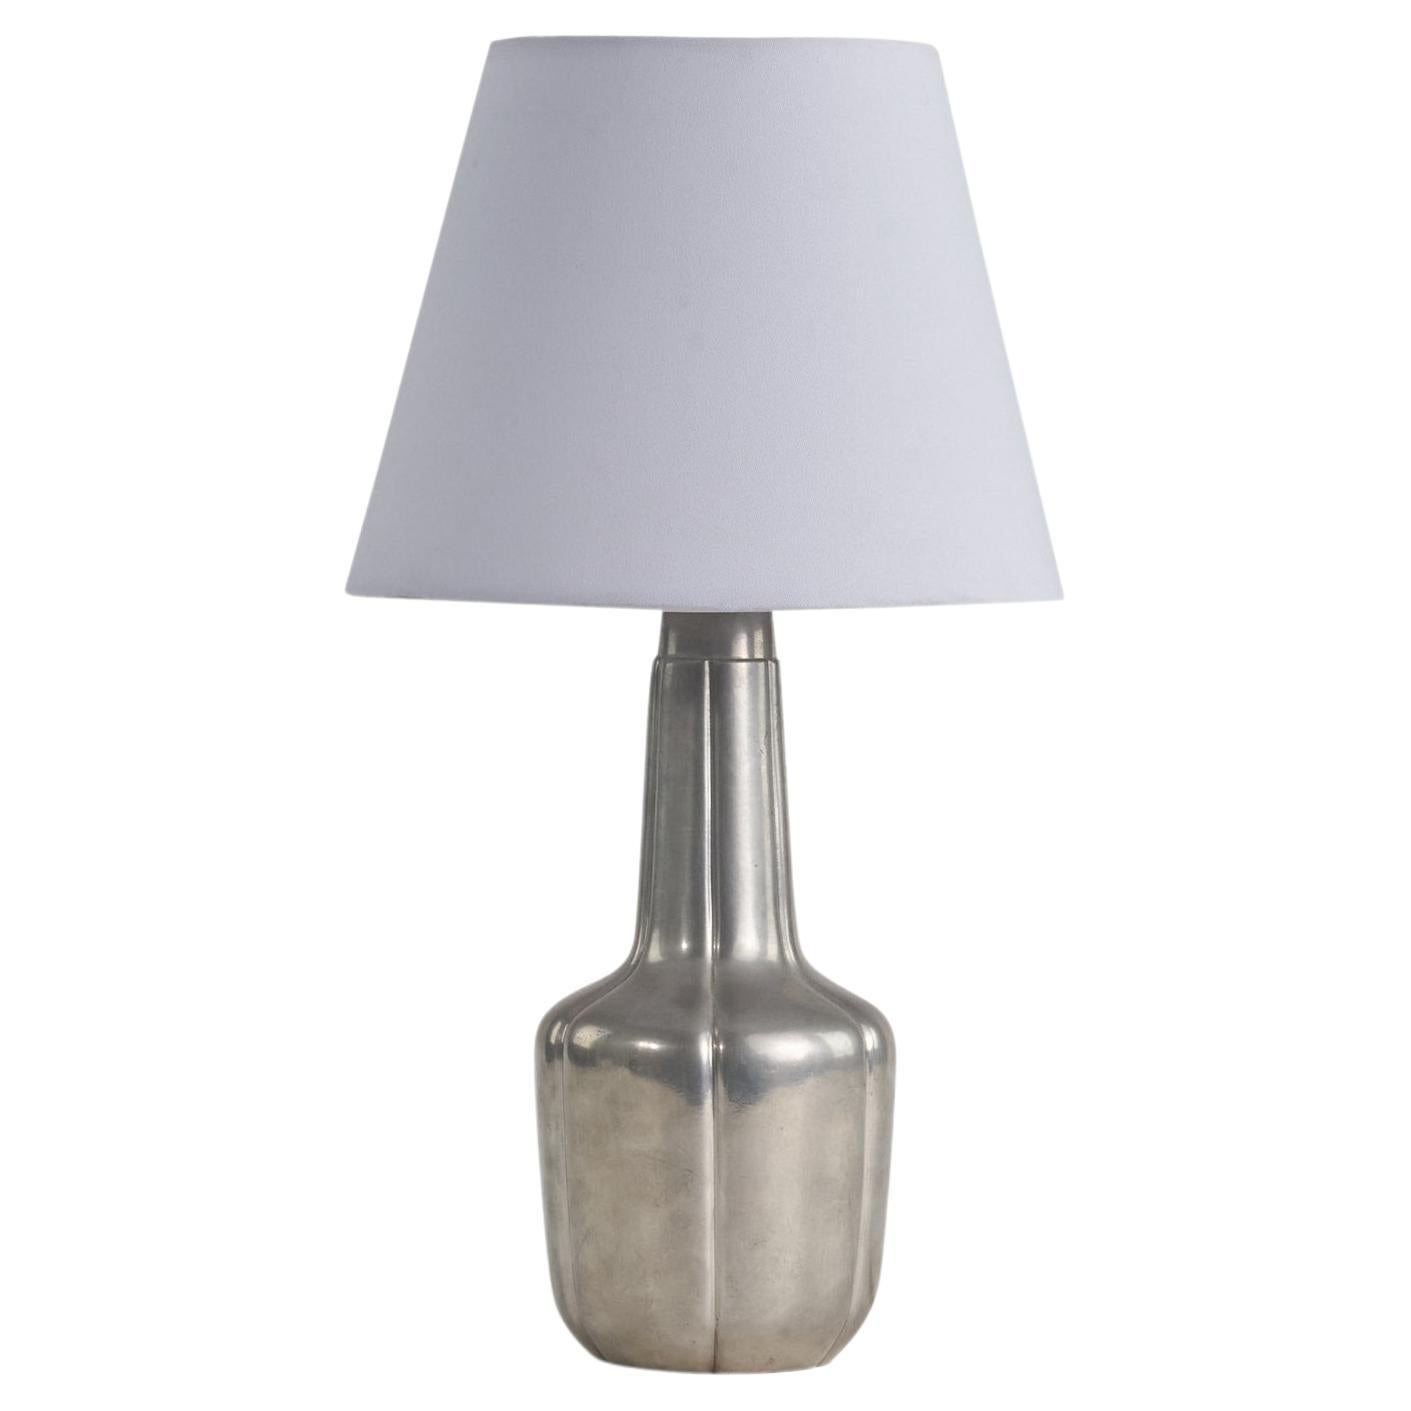 Just Andersen, Table Lamp, Pewter, Denmark, 1930s For Sale